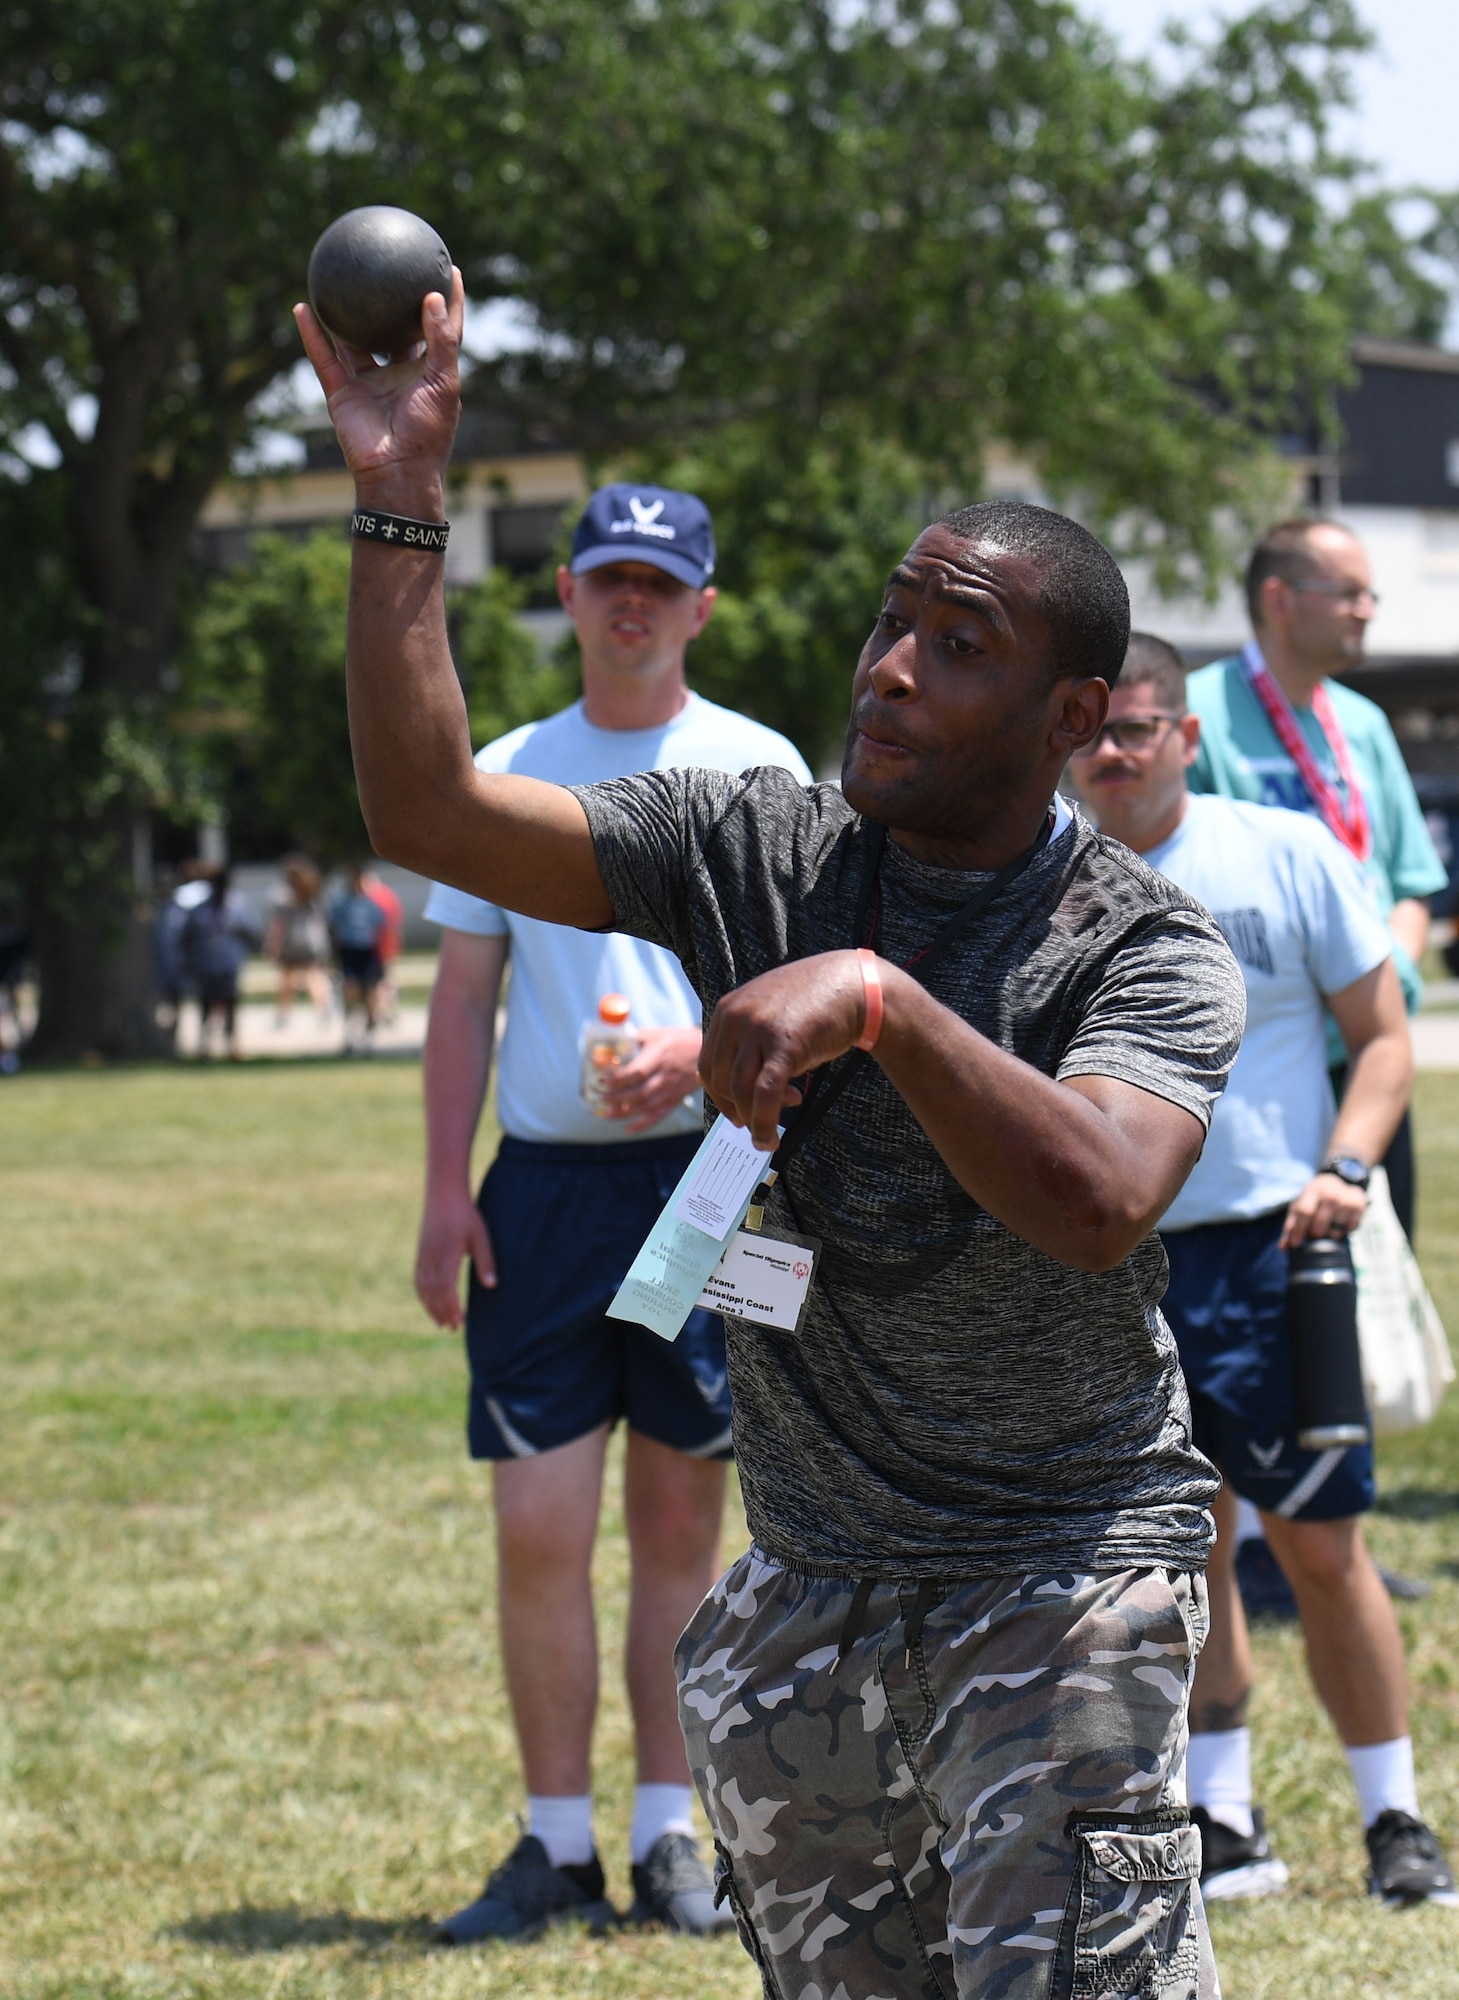 Miguel Evans, Area 3 athlete, participates in shot put during the Special Olympics Mississippi Summer Games at Keesler Air Force Base, Miss., May 14, 2022. Over 600 athletes participated in the Summer Games. (U.S. Air Force photo by Kemberly Groue)